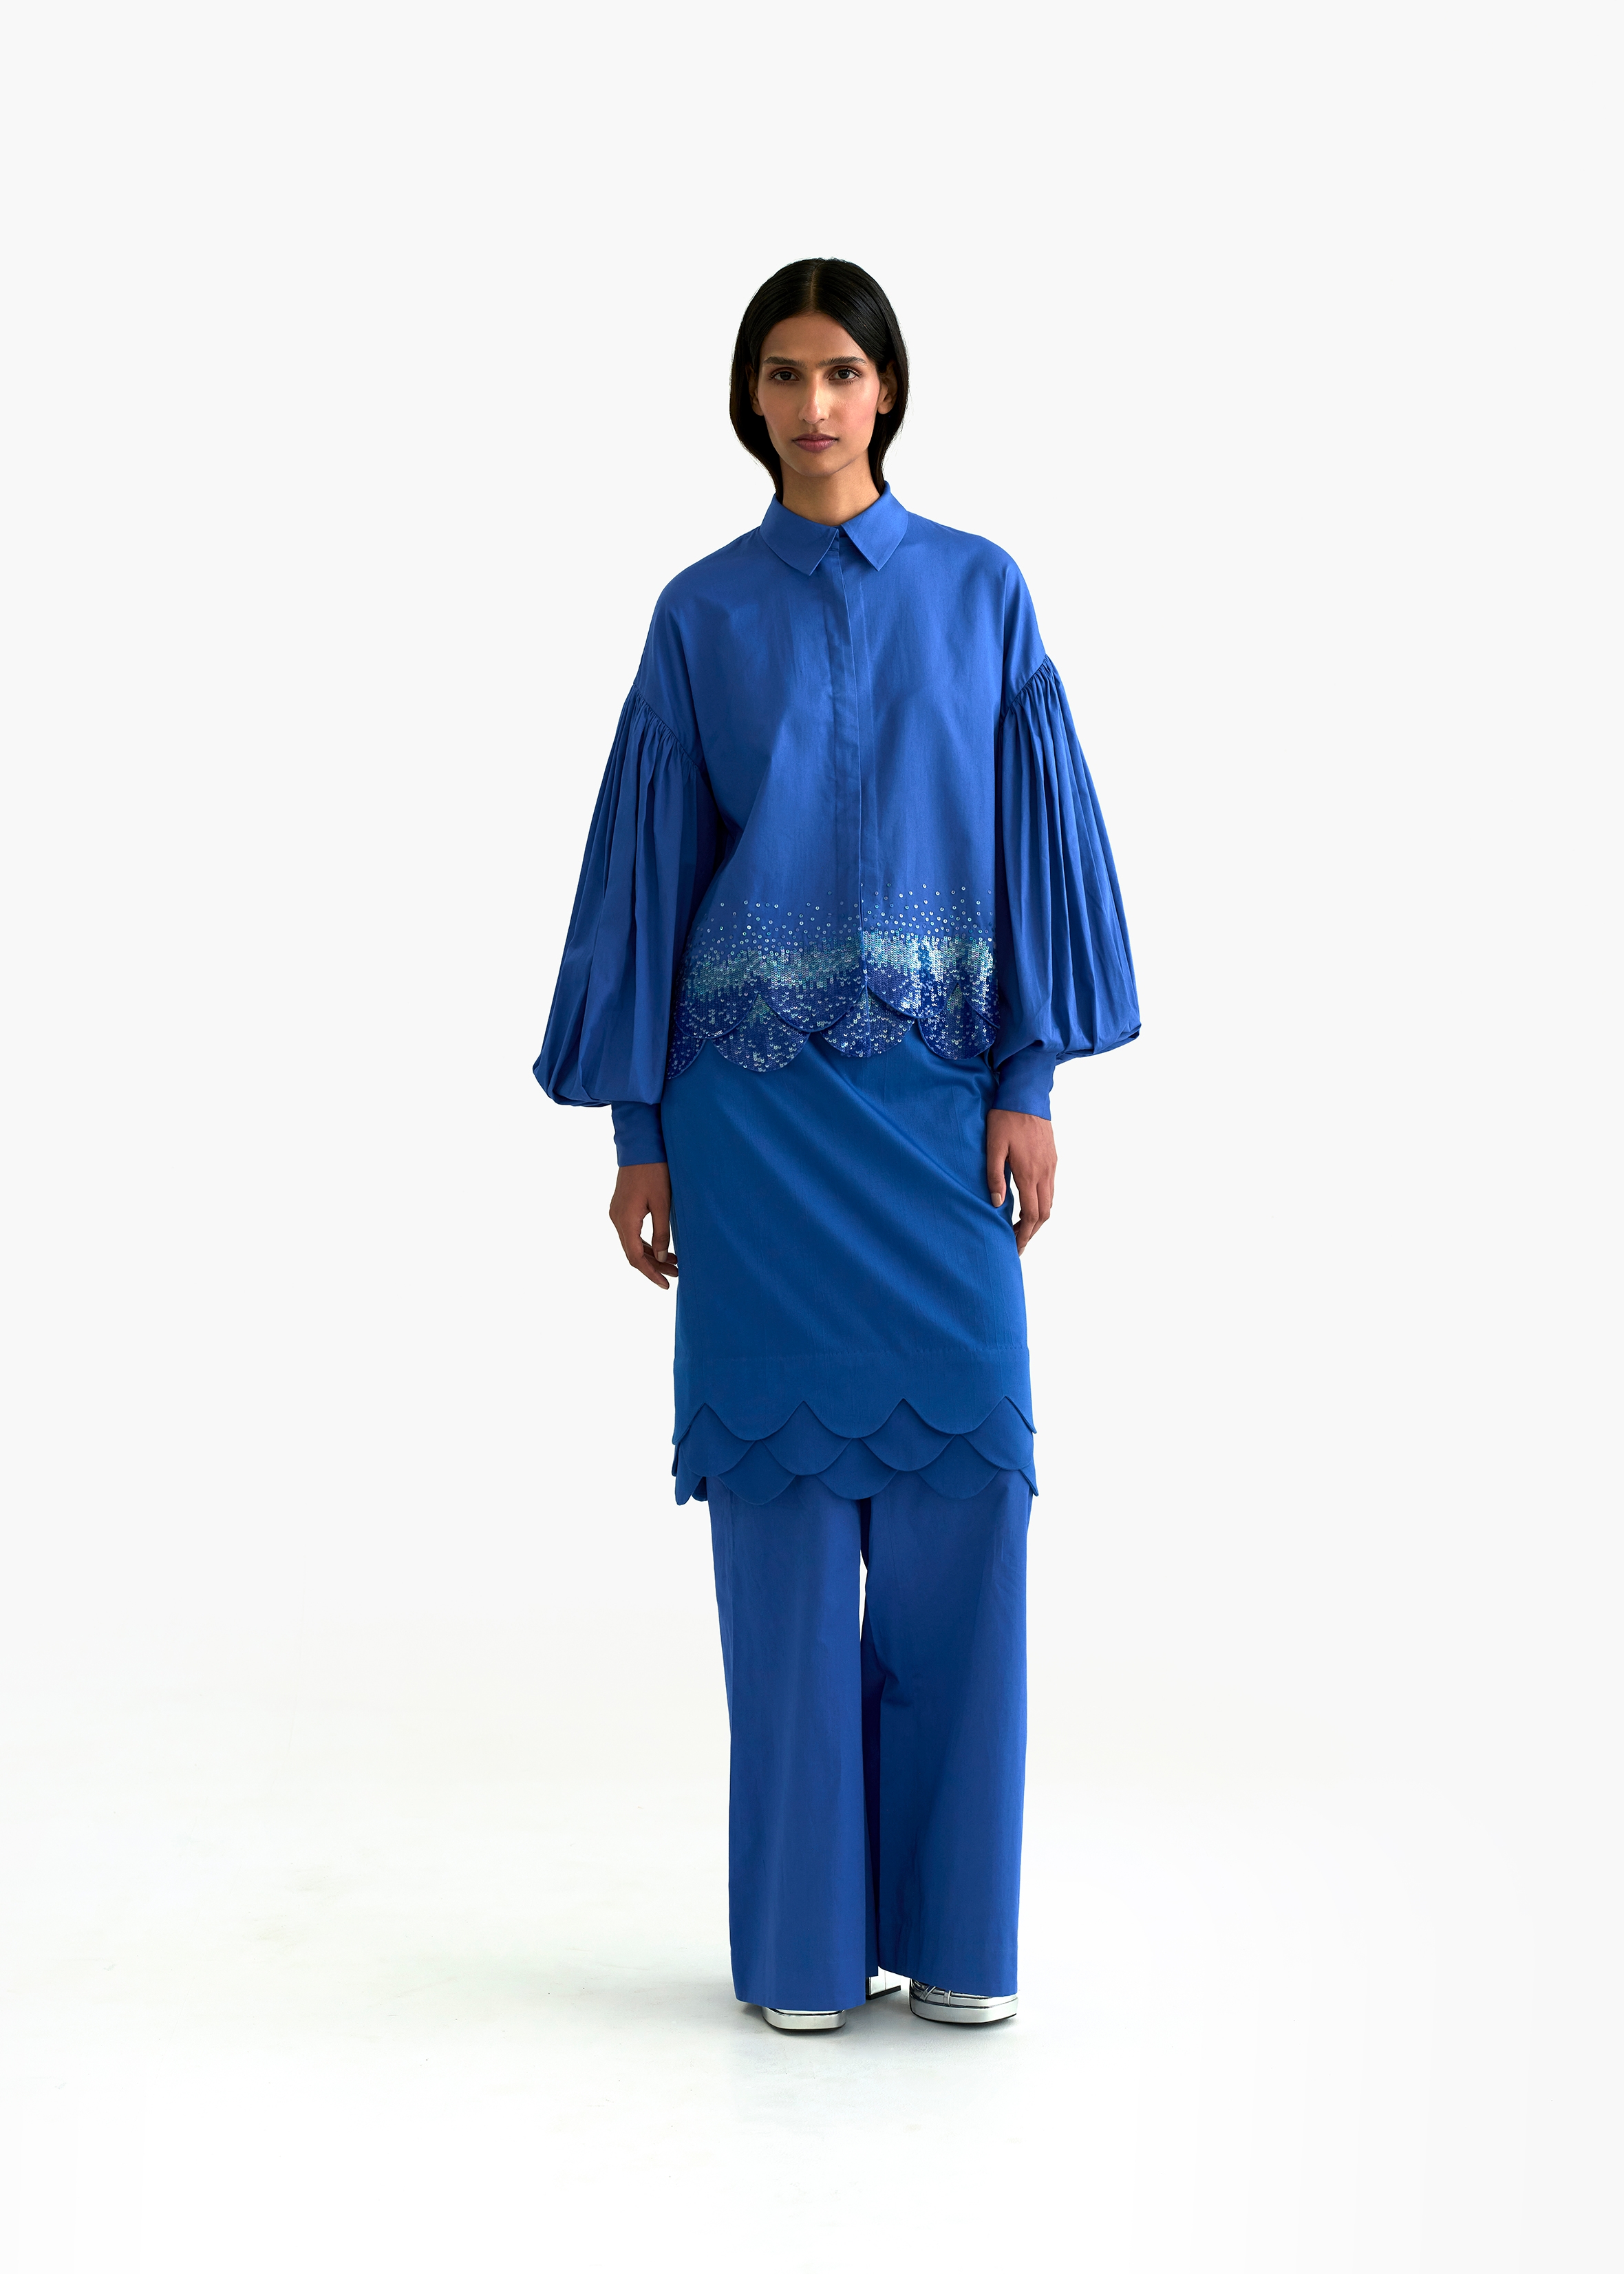 Women's Blue Egyptian giza cotton scalloped Embroidered Drop shoulder shirt